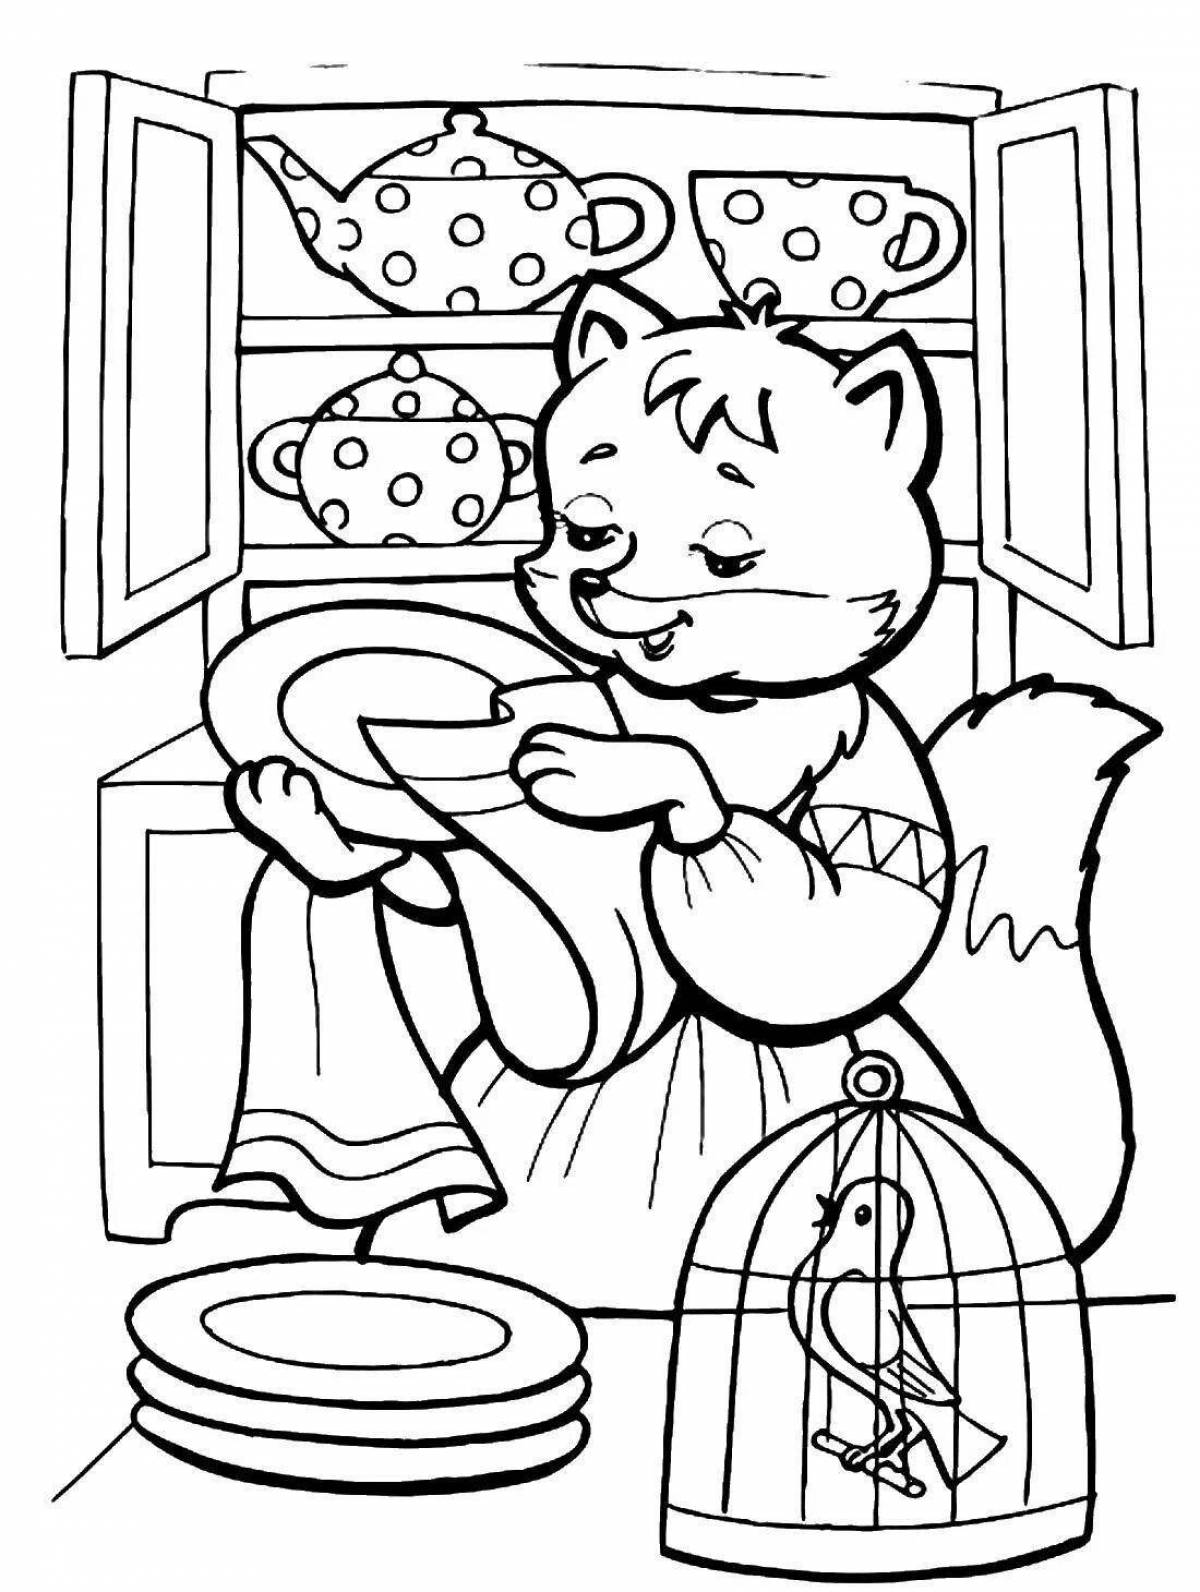 Cute fox and crane coloring pages for kids